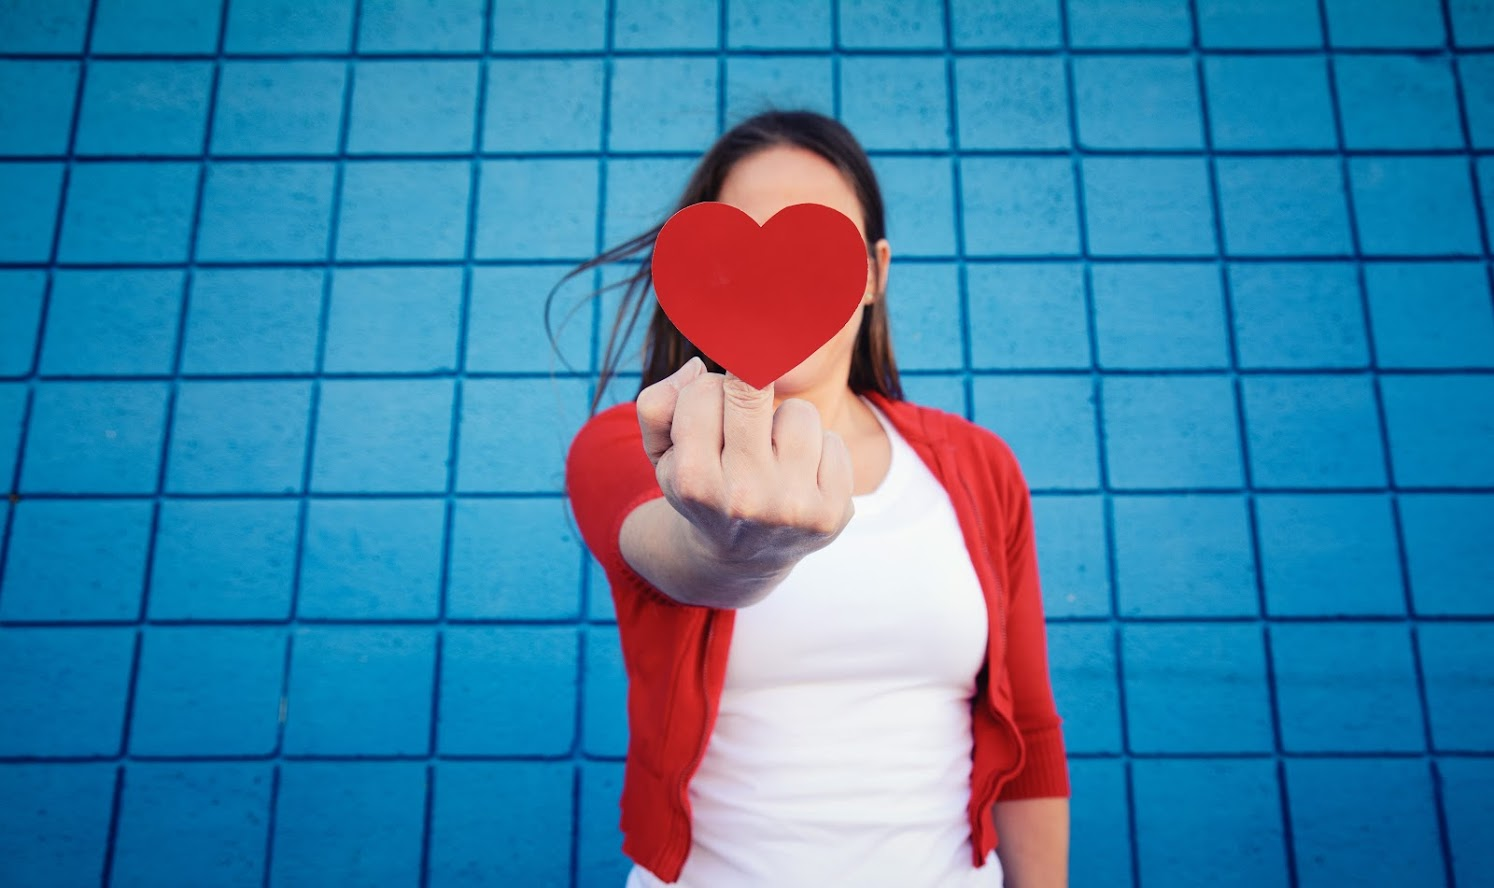 A passive aggressive woman stands in front of a blue wall and flips off the camera while concealing it with a paper heart.